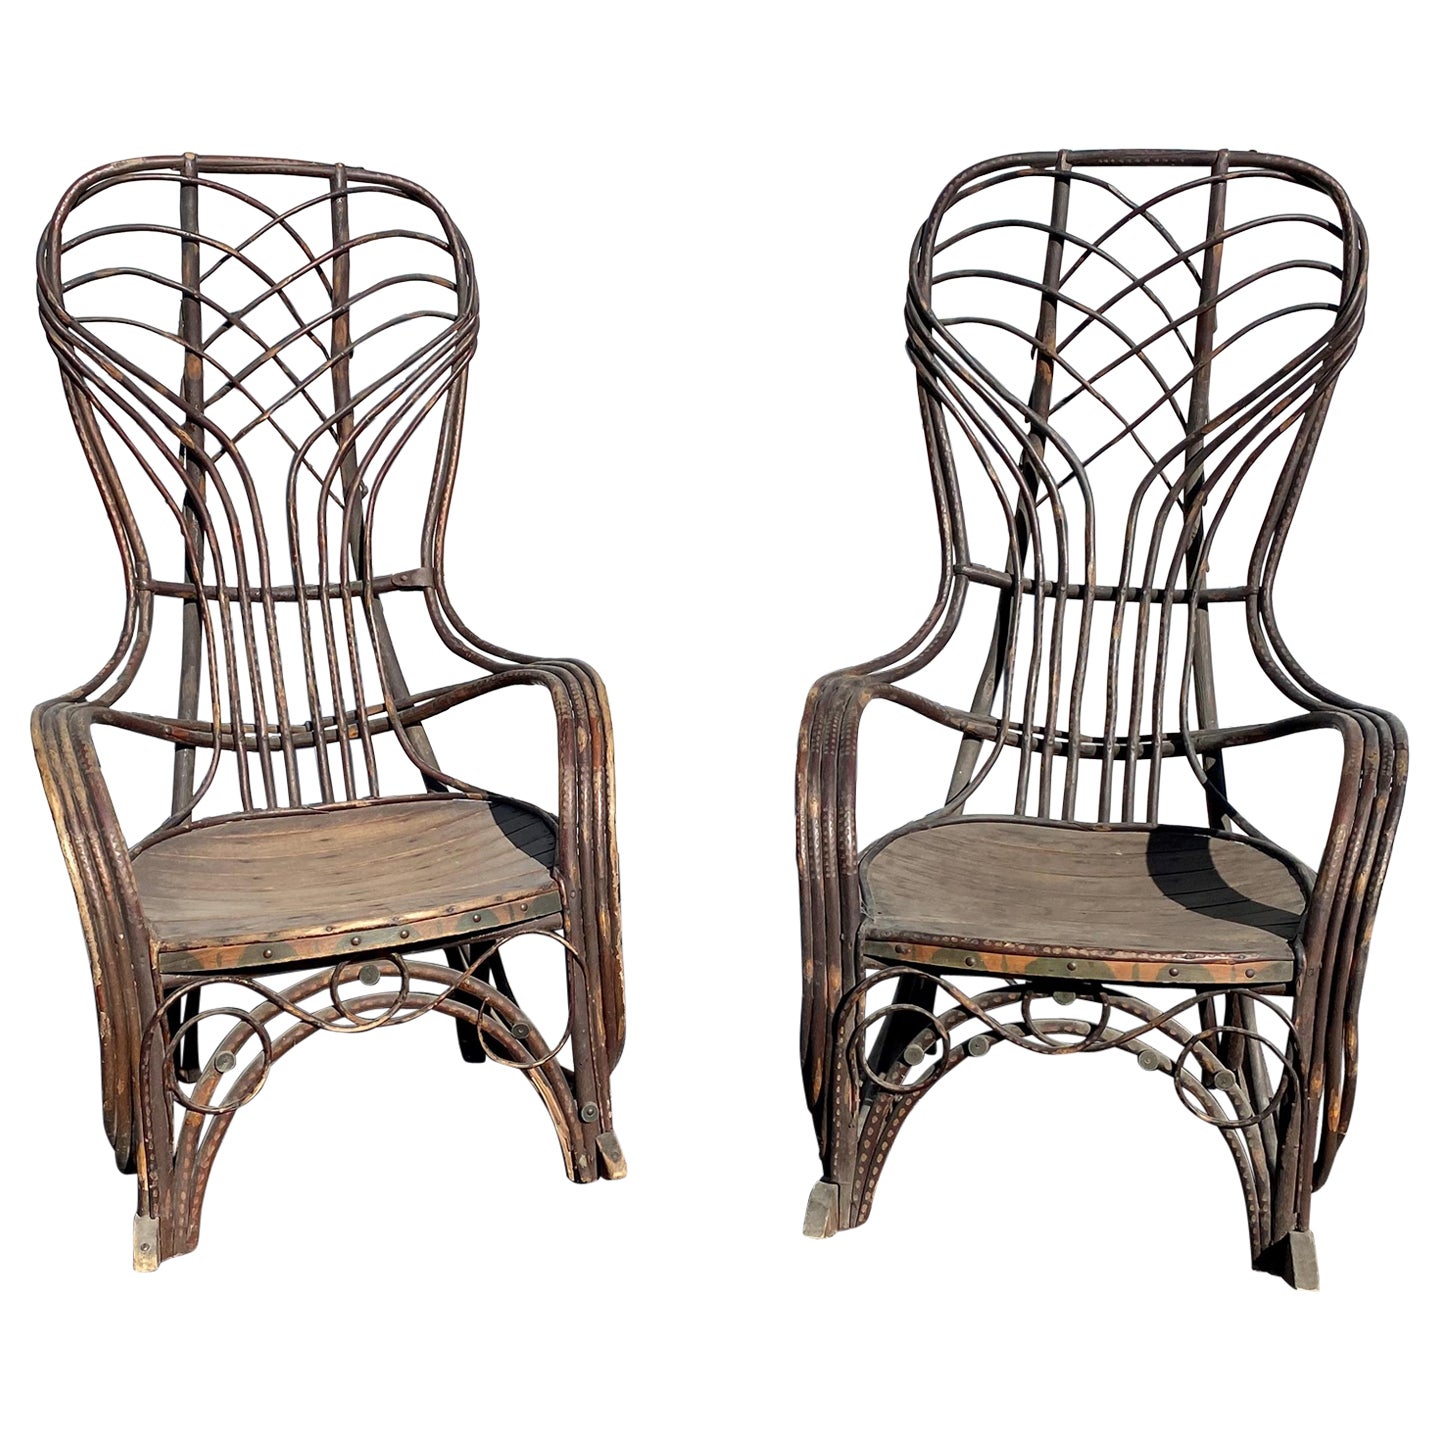 Pair of Late 19th Century Twig Bentwood Painted Adirondack Rocking Chairs